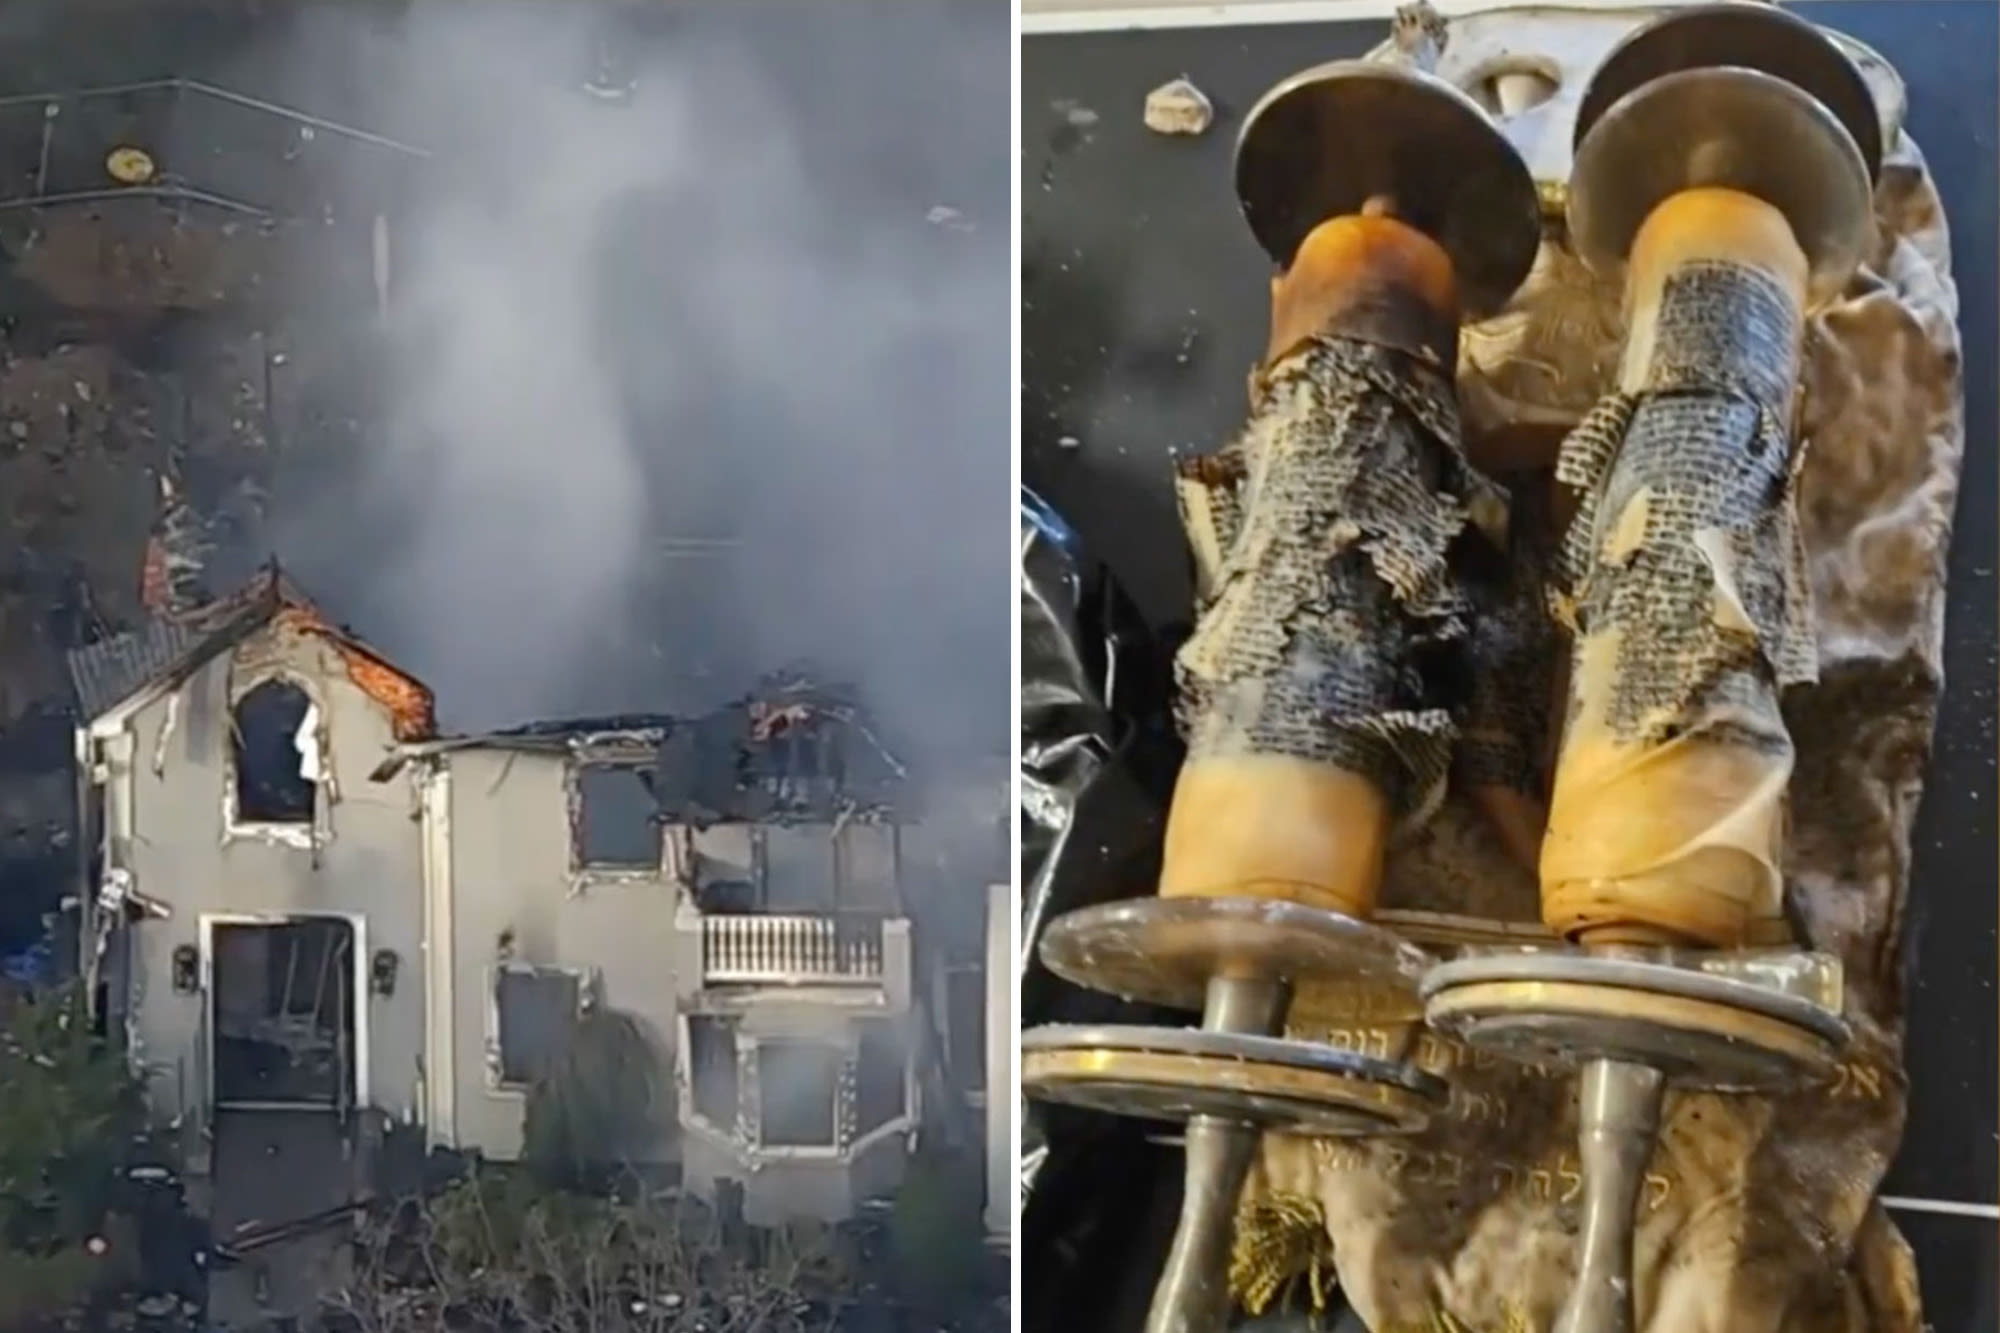 Volunteers scramble to rescue Torah scrolls buried in rubble after NY synagogue burns down: ‘It was a sad sight’